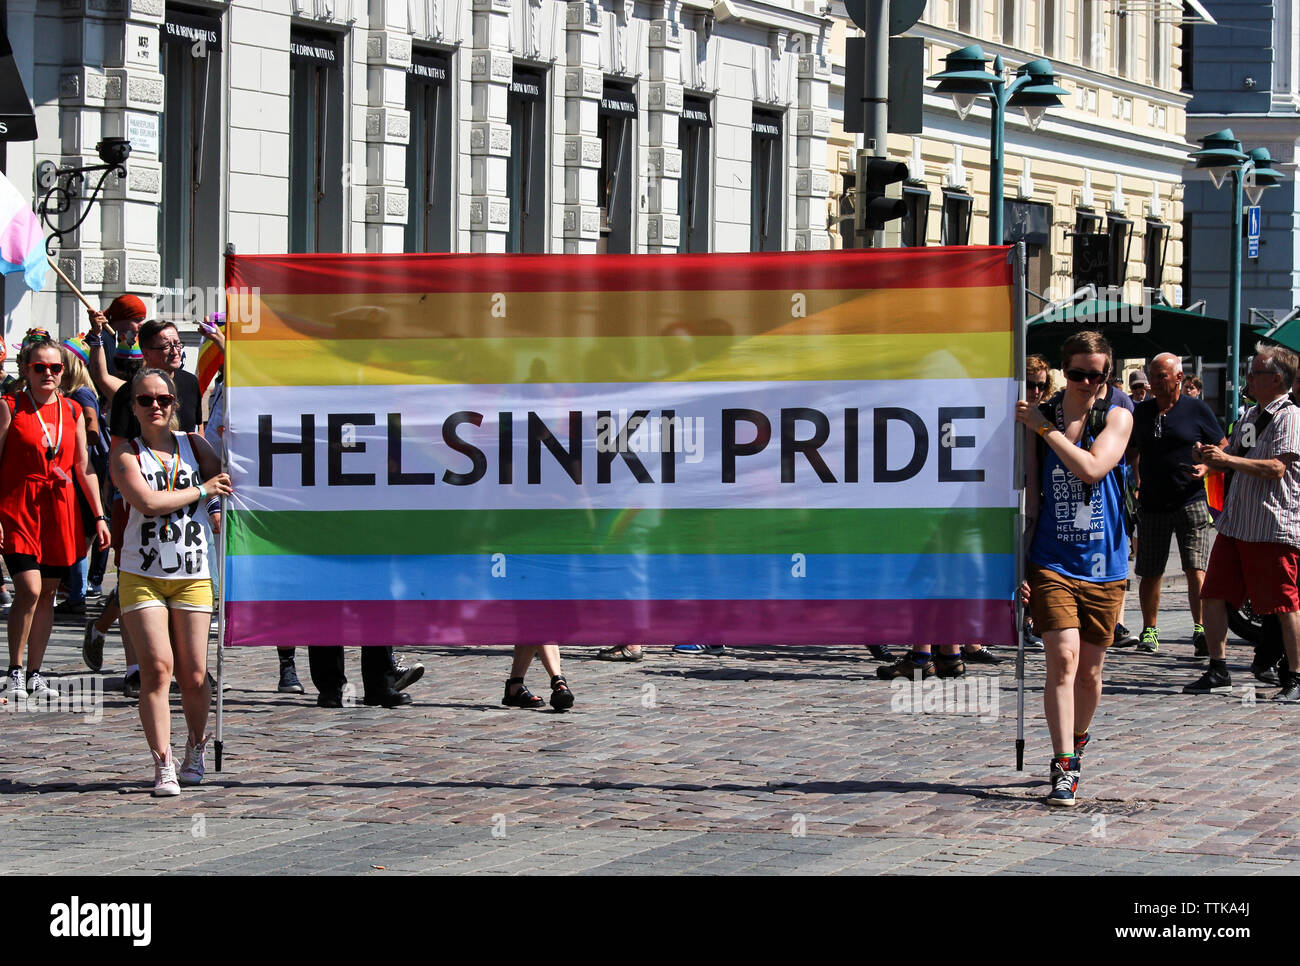 Helsinki Pride rainbow flag or banner at the 2016 parade in Helsinki, Finland Stock Photo